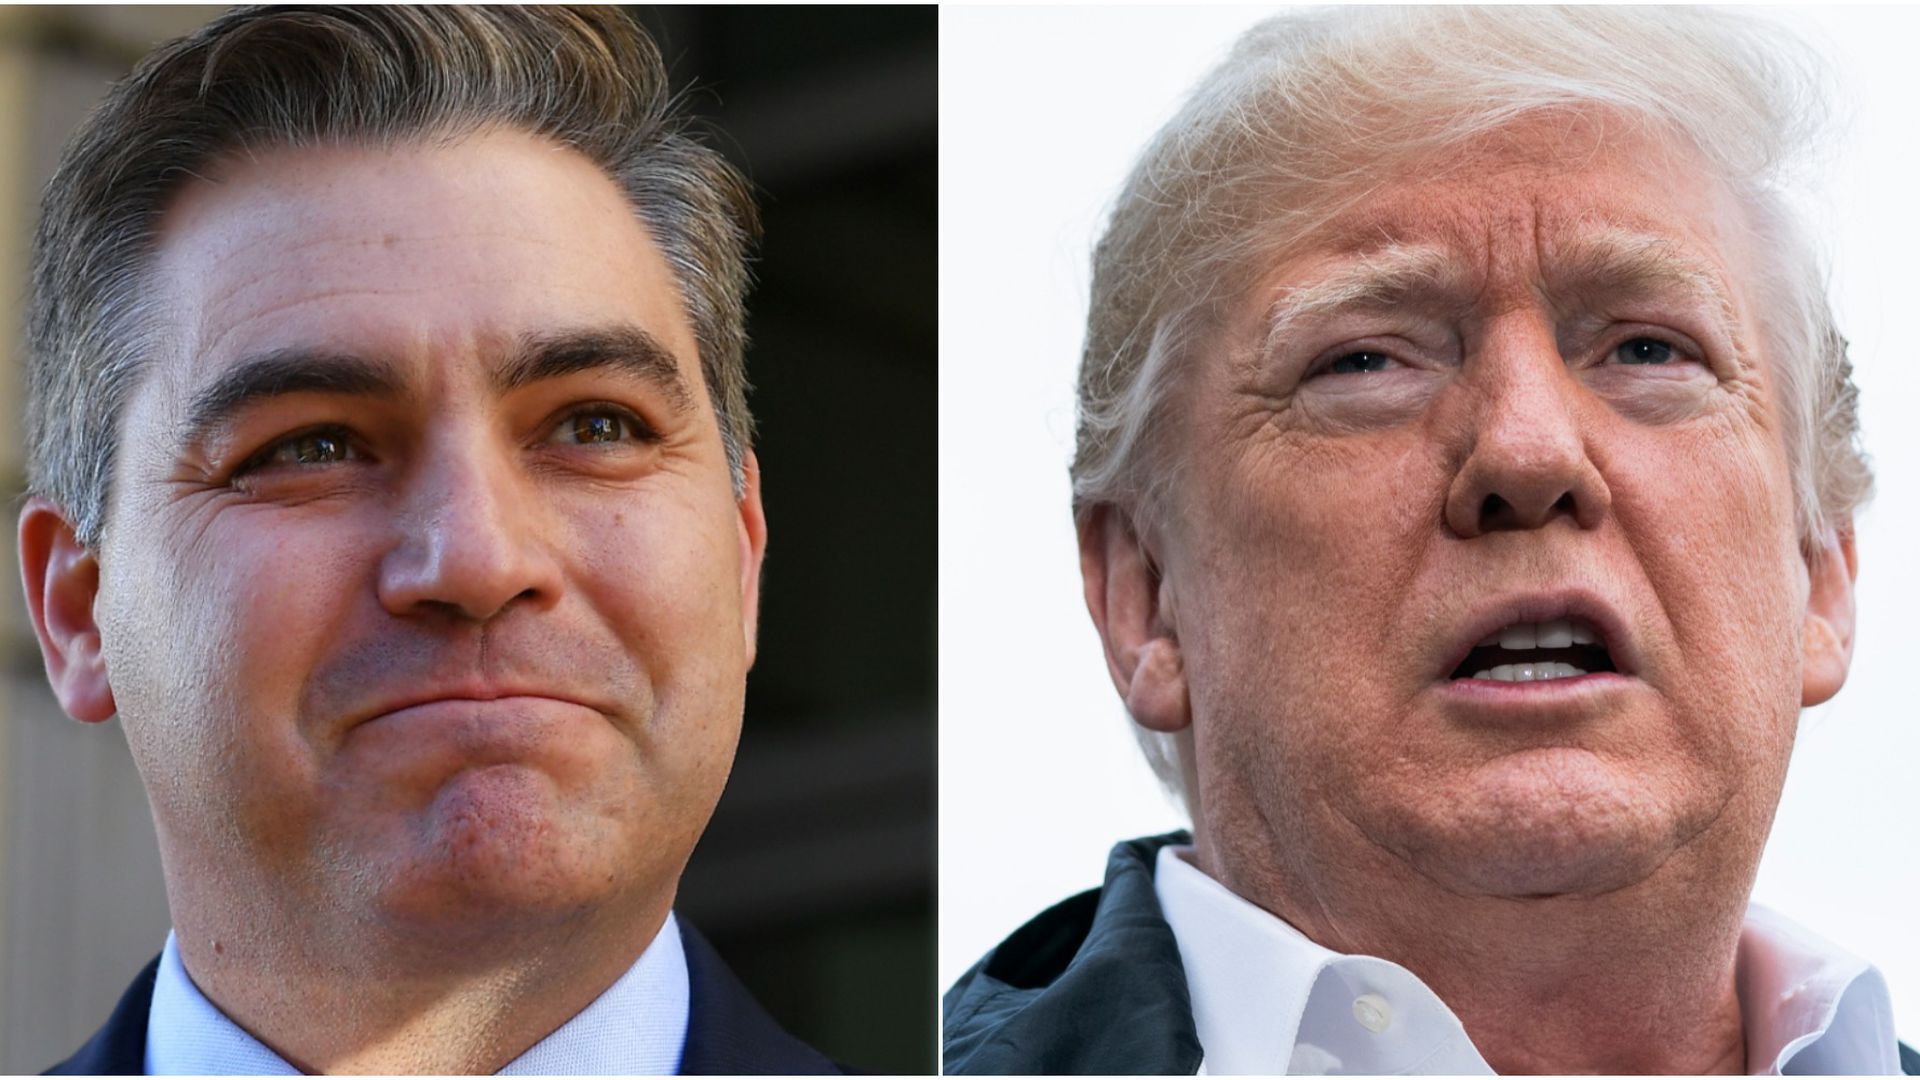 Split picture of Jim Acosta and President Trump